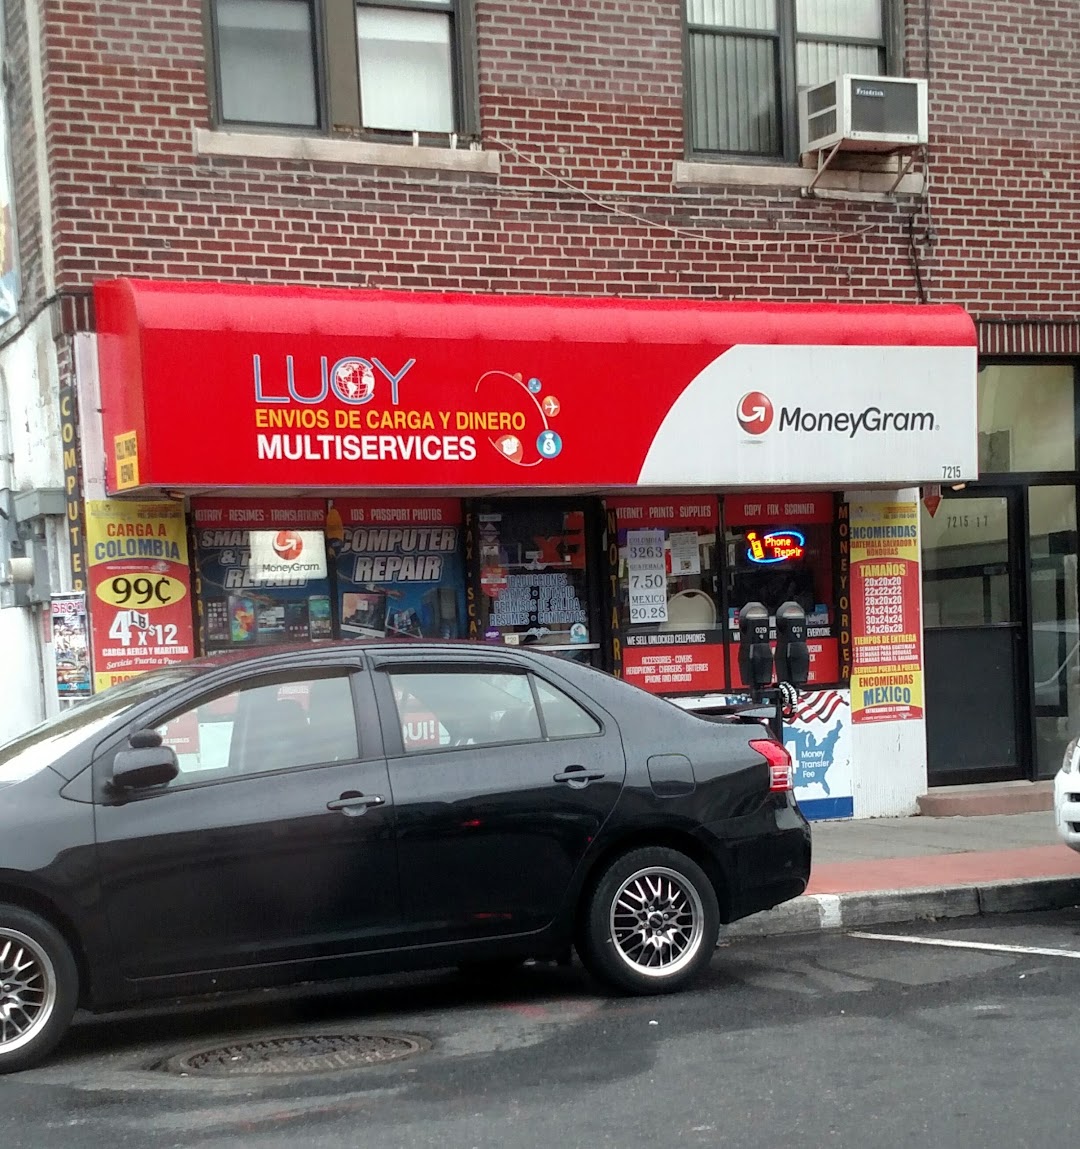 Lucy Multiservices